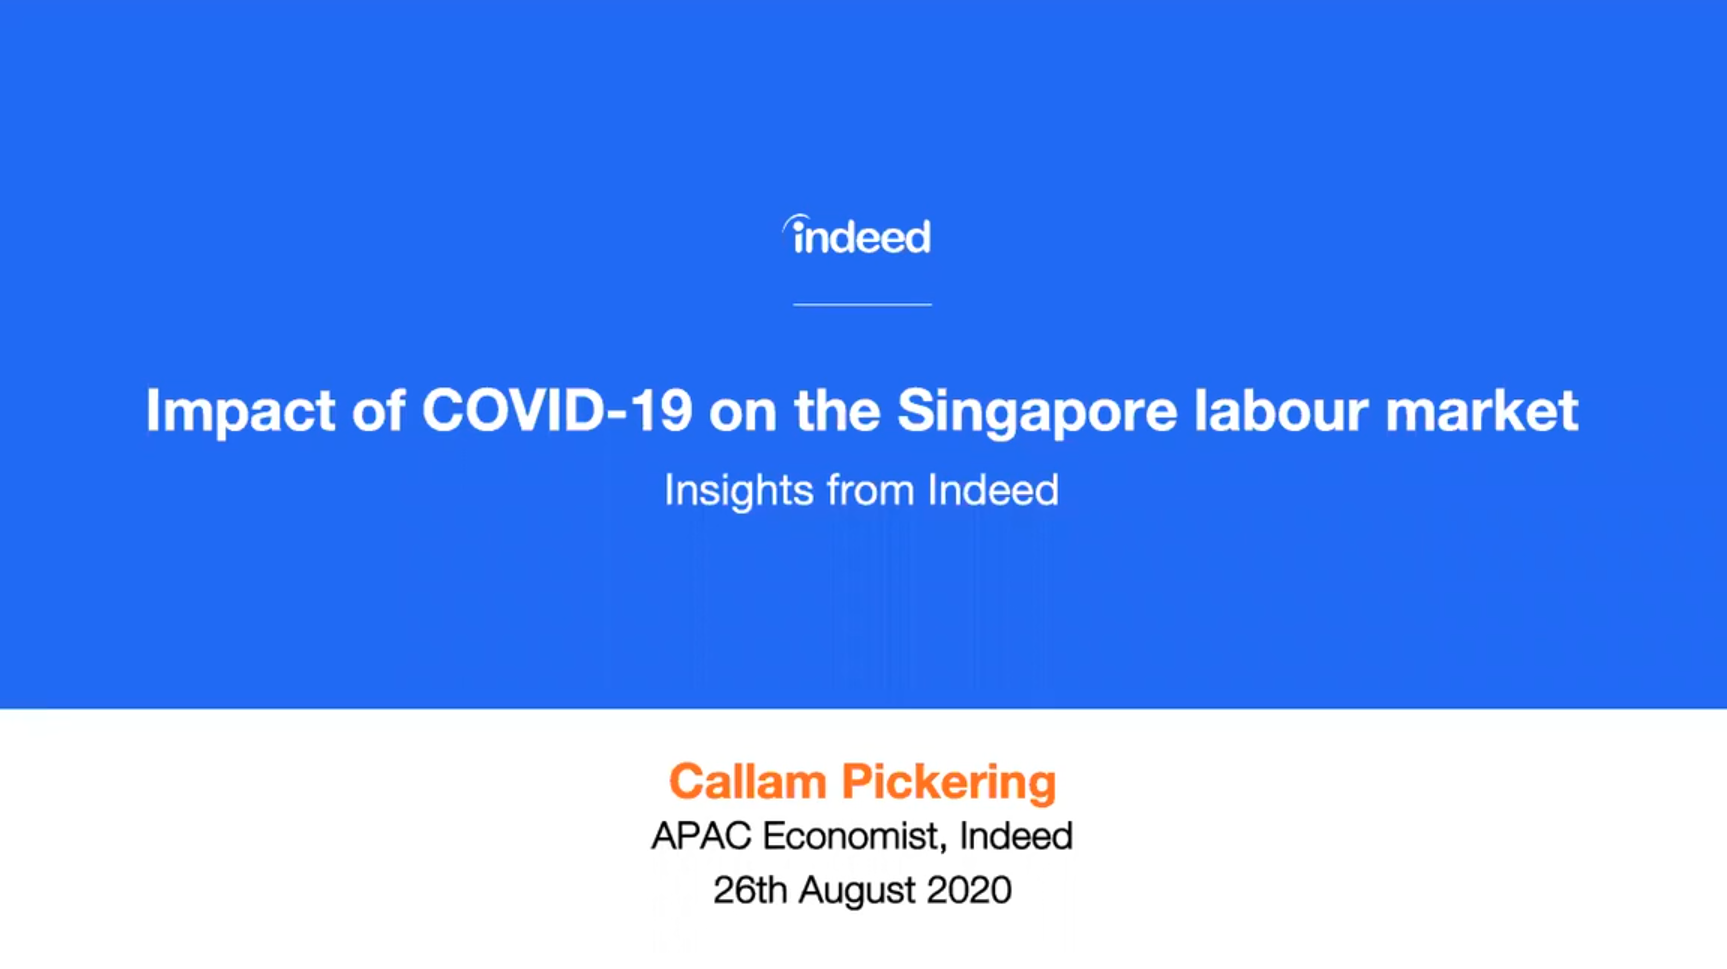 Impact of Covid-19 on the Singapore labour market